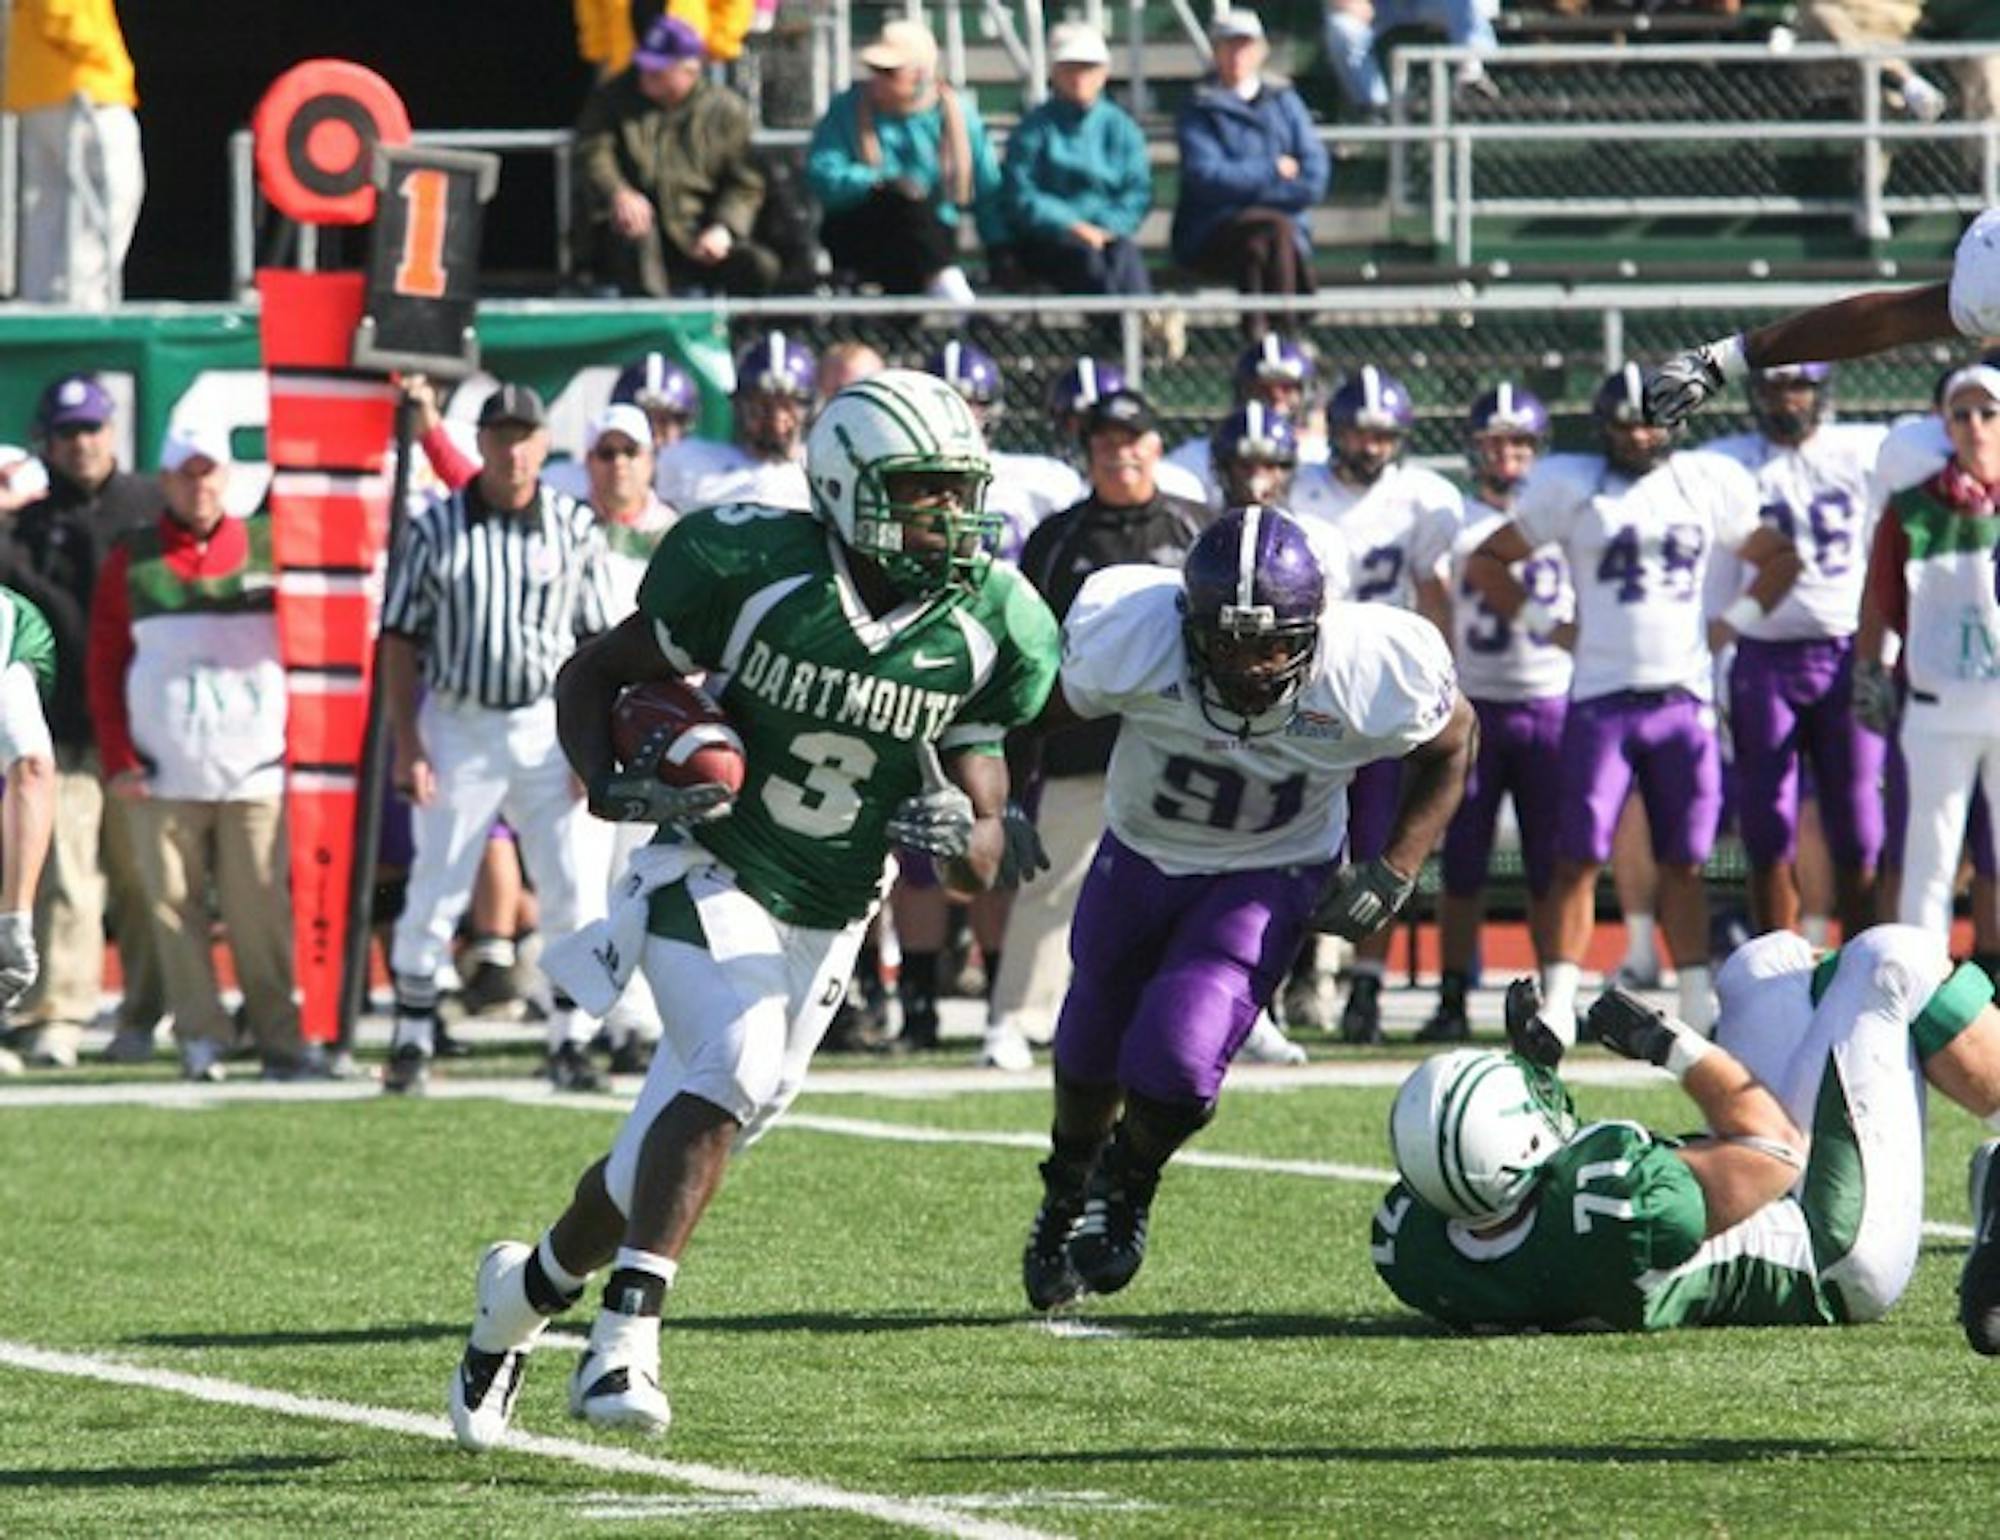 Milan Williams '09 has led the Big Green in rushing yards, but he will need a big game to beat Harvard on Saturday.